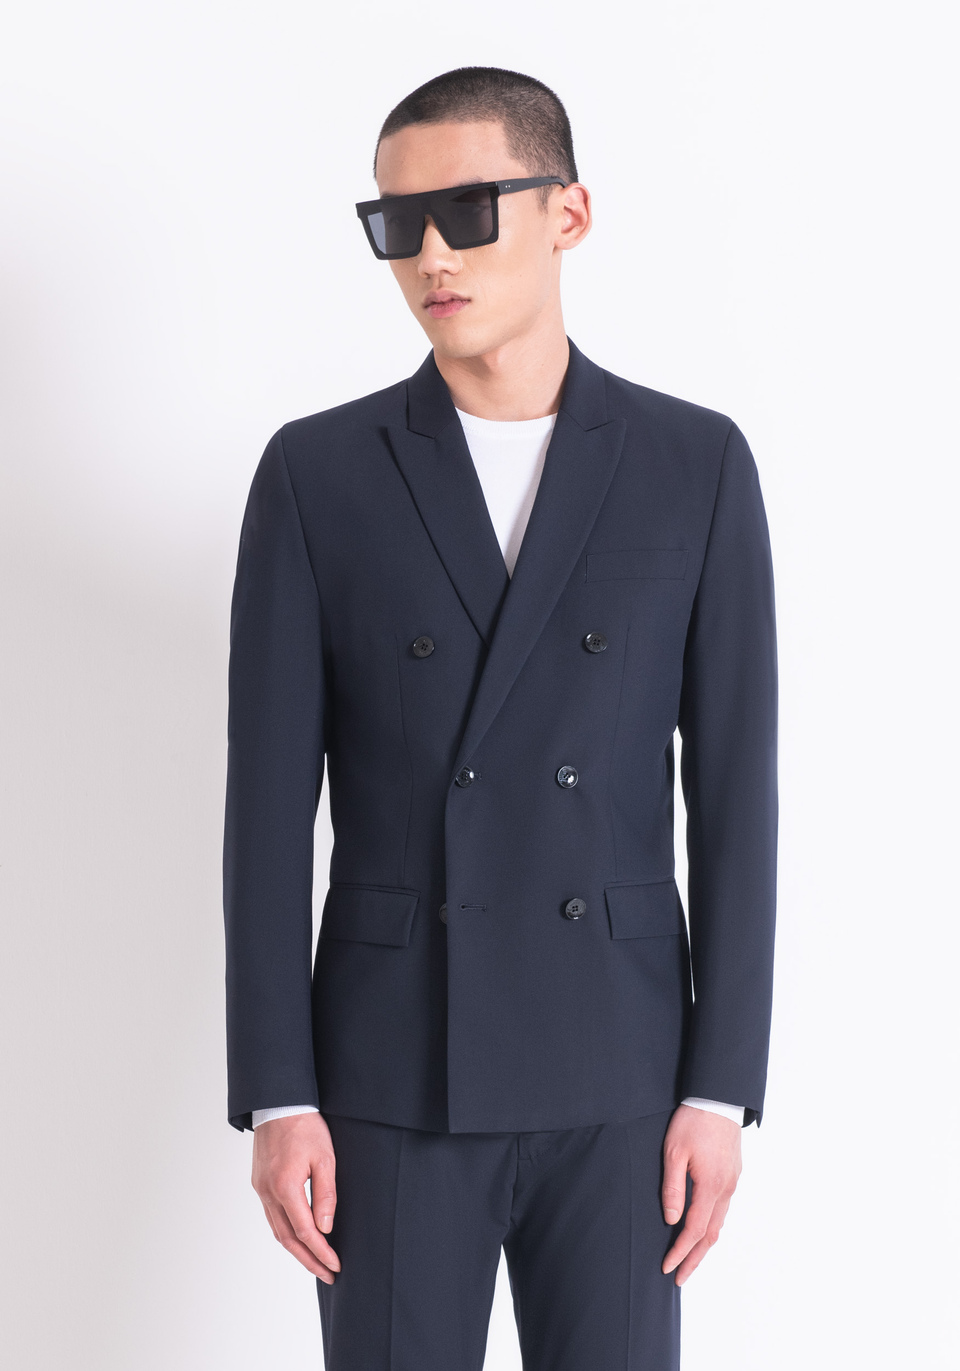 SLIM FIT "KATE" JACKET IN VISCOSE BLEND FABRIC WITH DOUBLE-BREASTED DETAILS - Antony Morato Online Shop